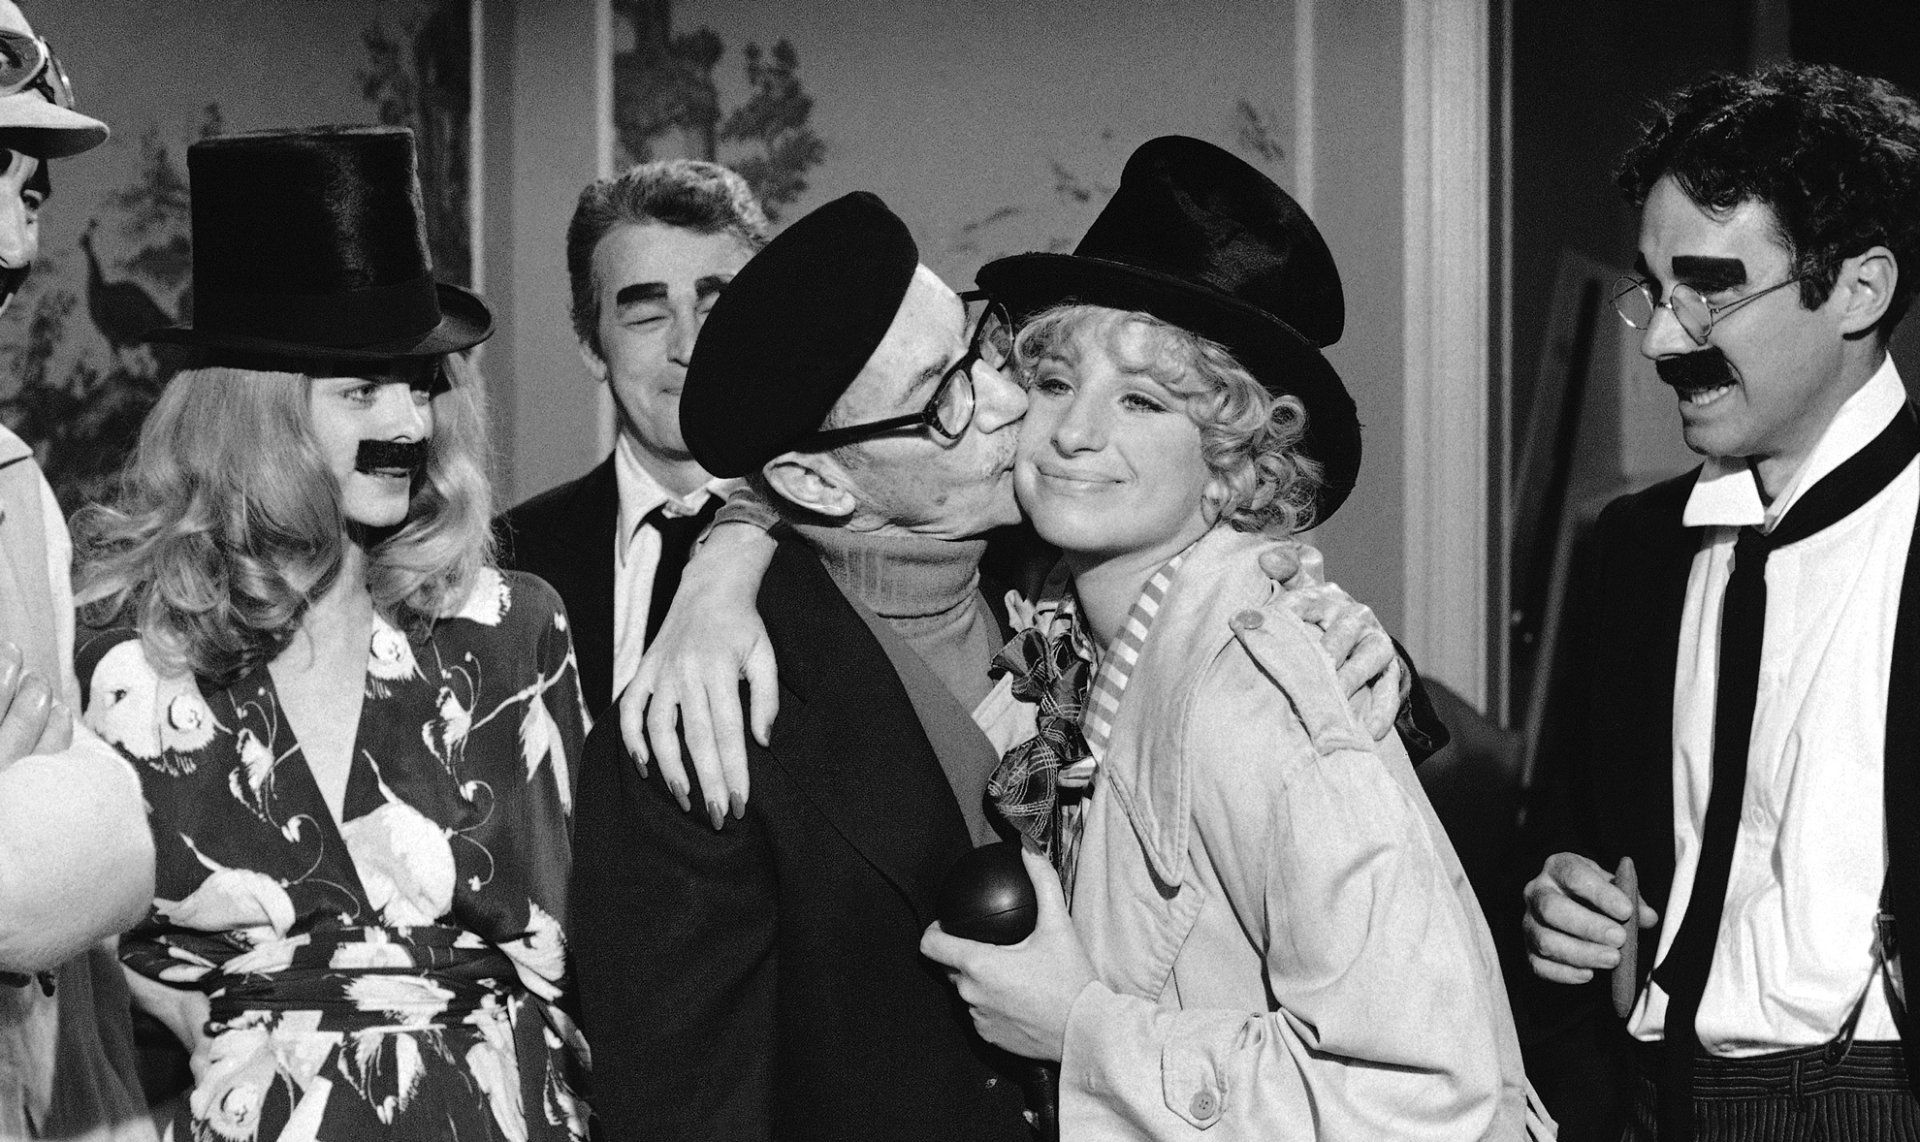 Diana Ewing, Groucho Marx, Streisand, and Bradford Dillman pose on the set of The Way We Were.